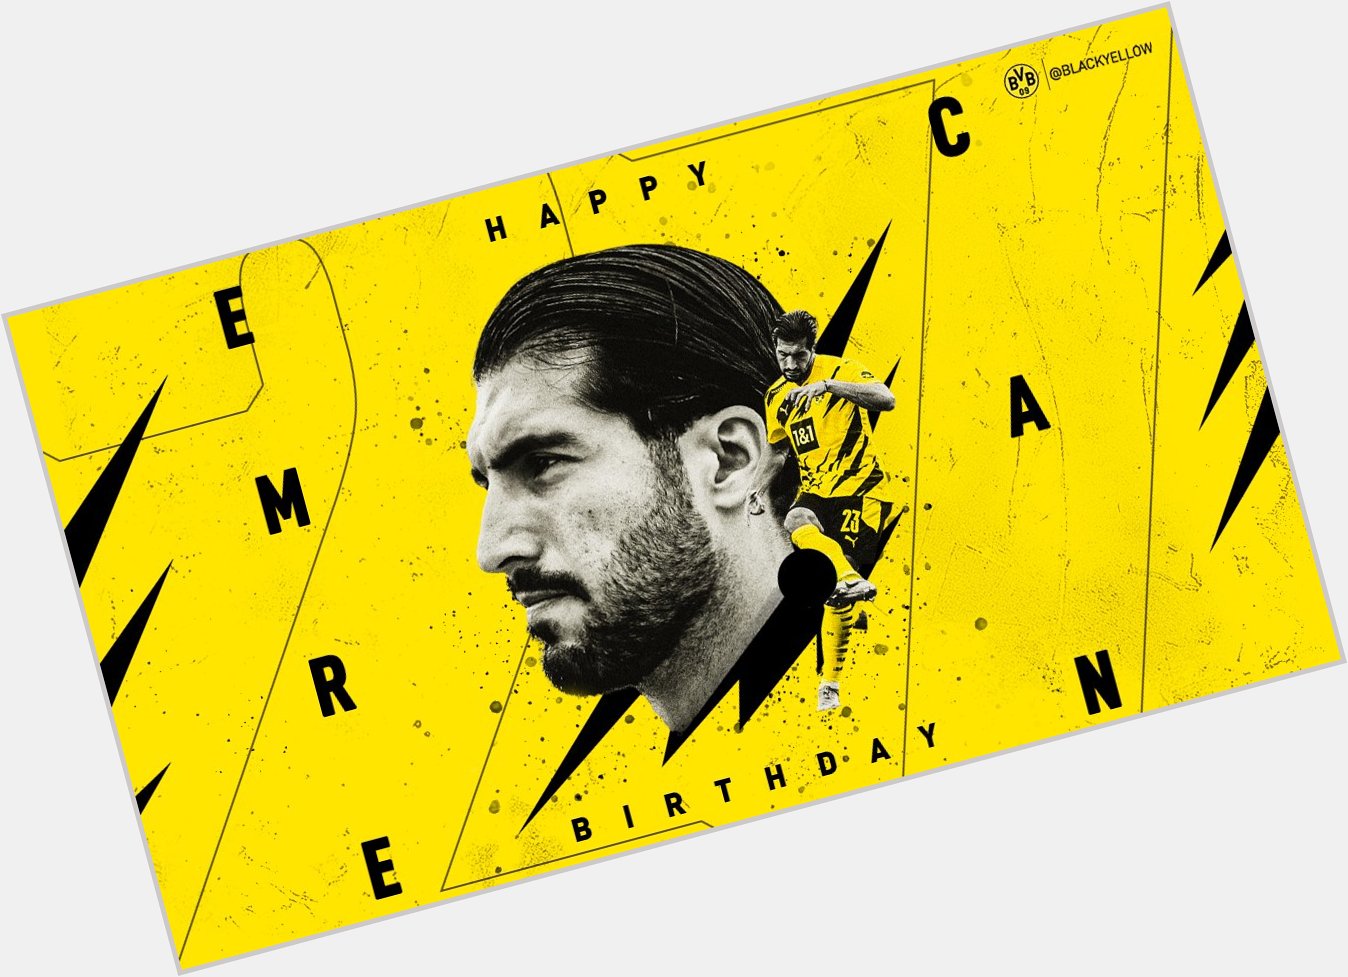 Join us in wishing the midfield/defensive beast, Emre Can, a very Happy Birthday! 